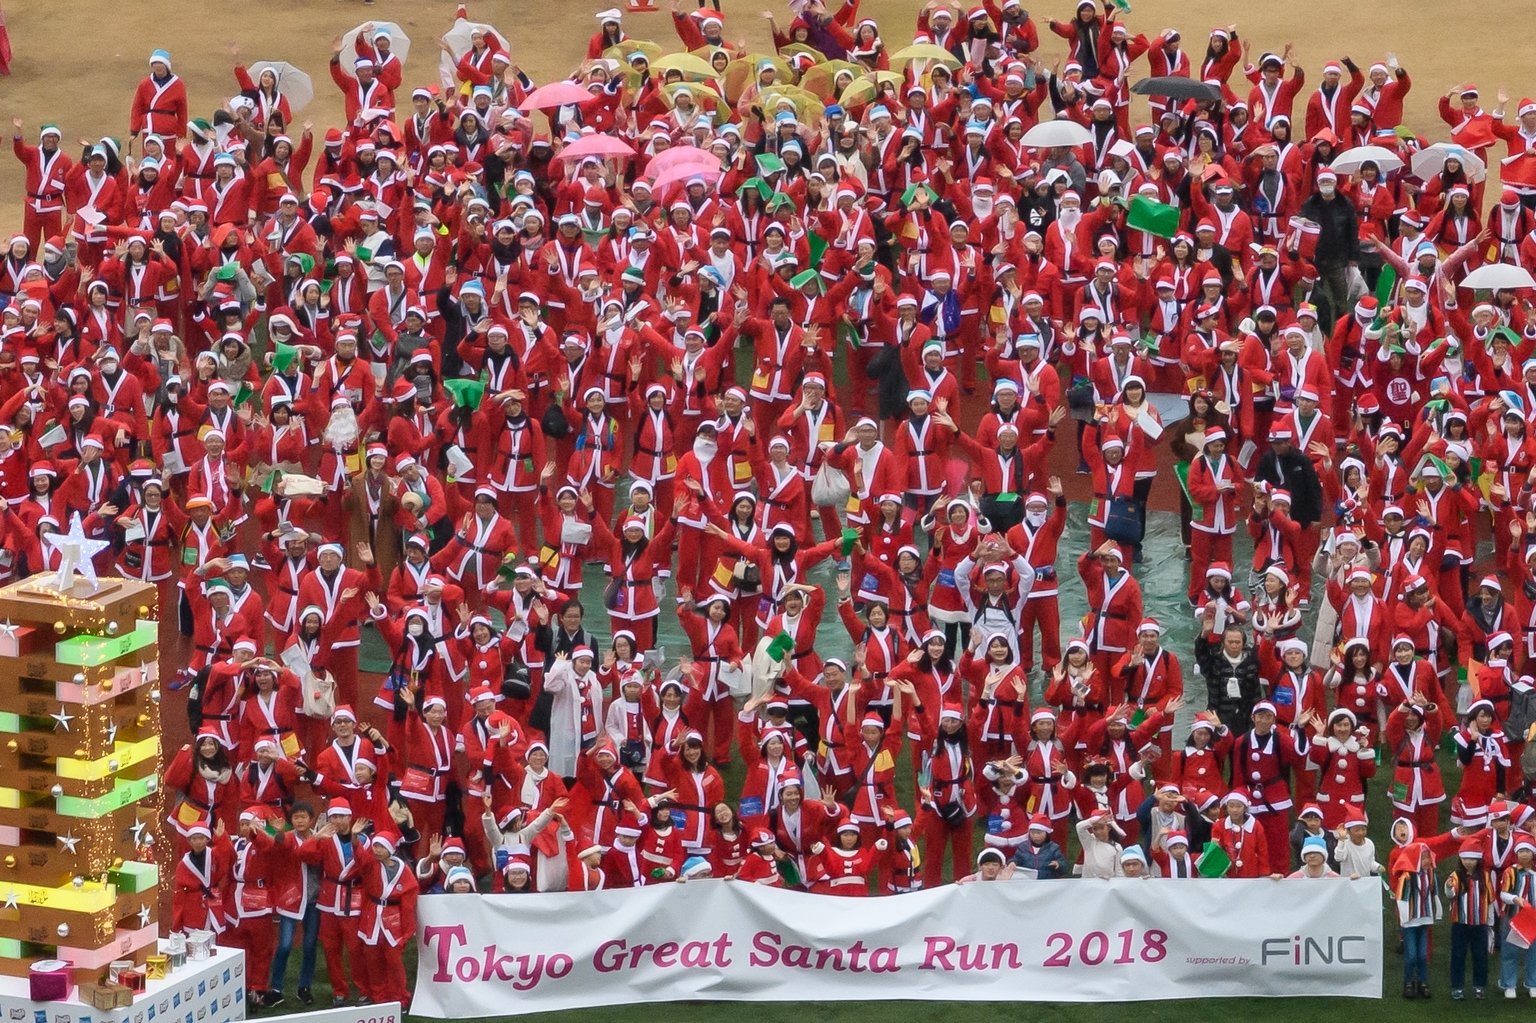 Suit Up for Tokyo’s Great Santa Run of 2019